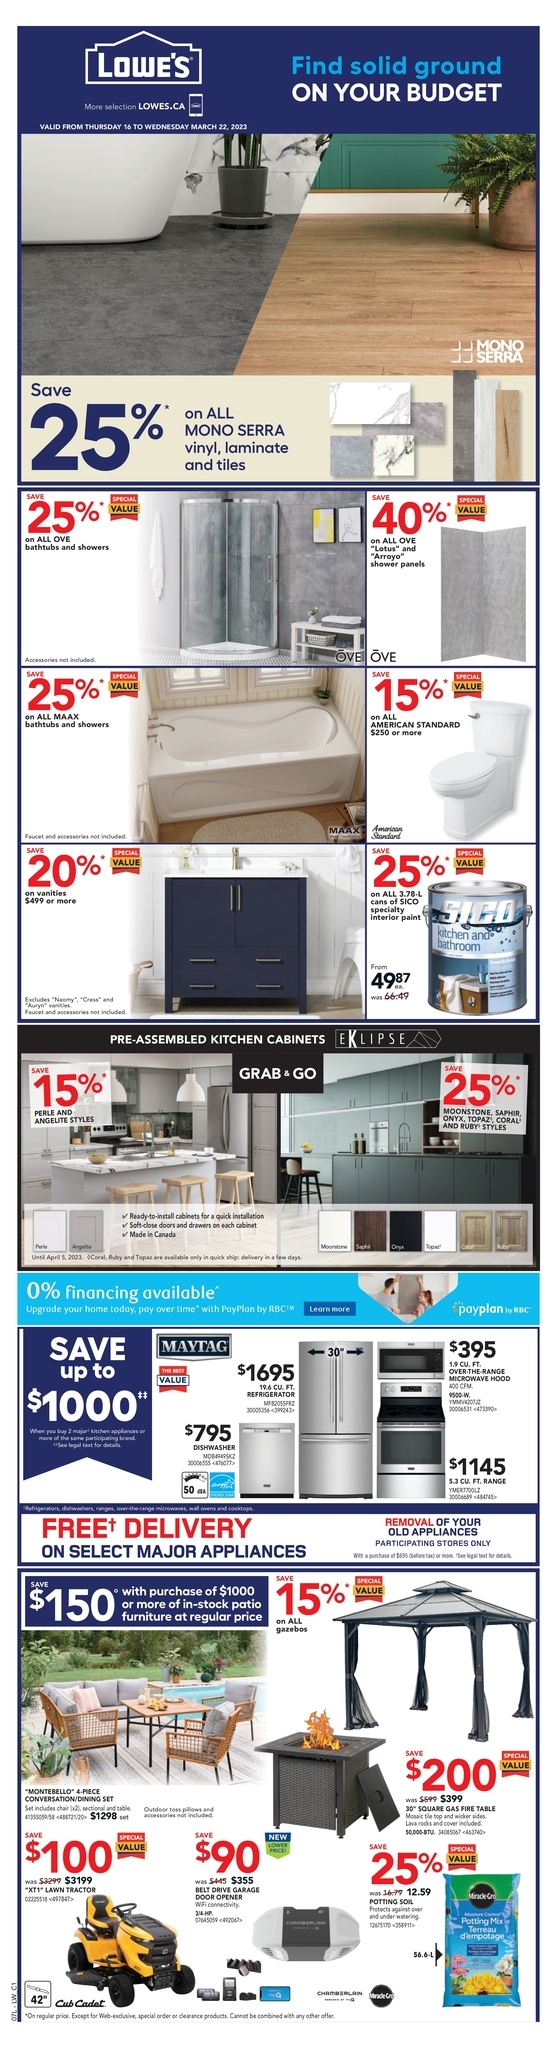 Lowe's - Weekly Flyer Specials - Page 1